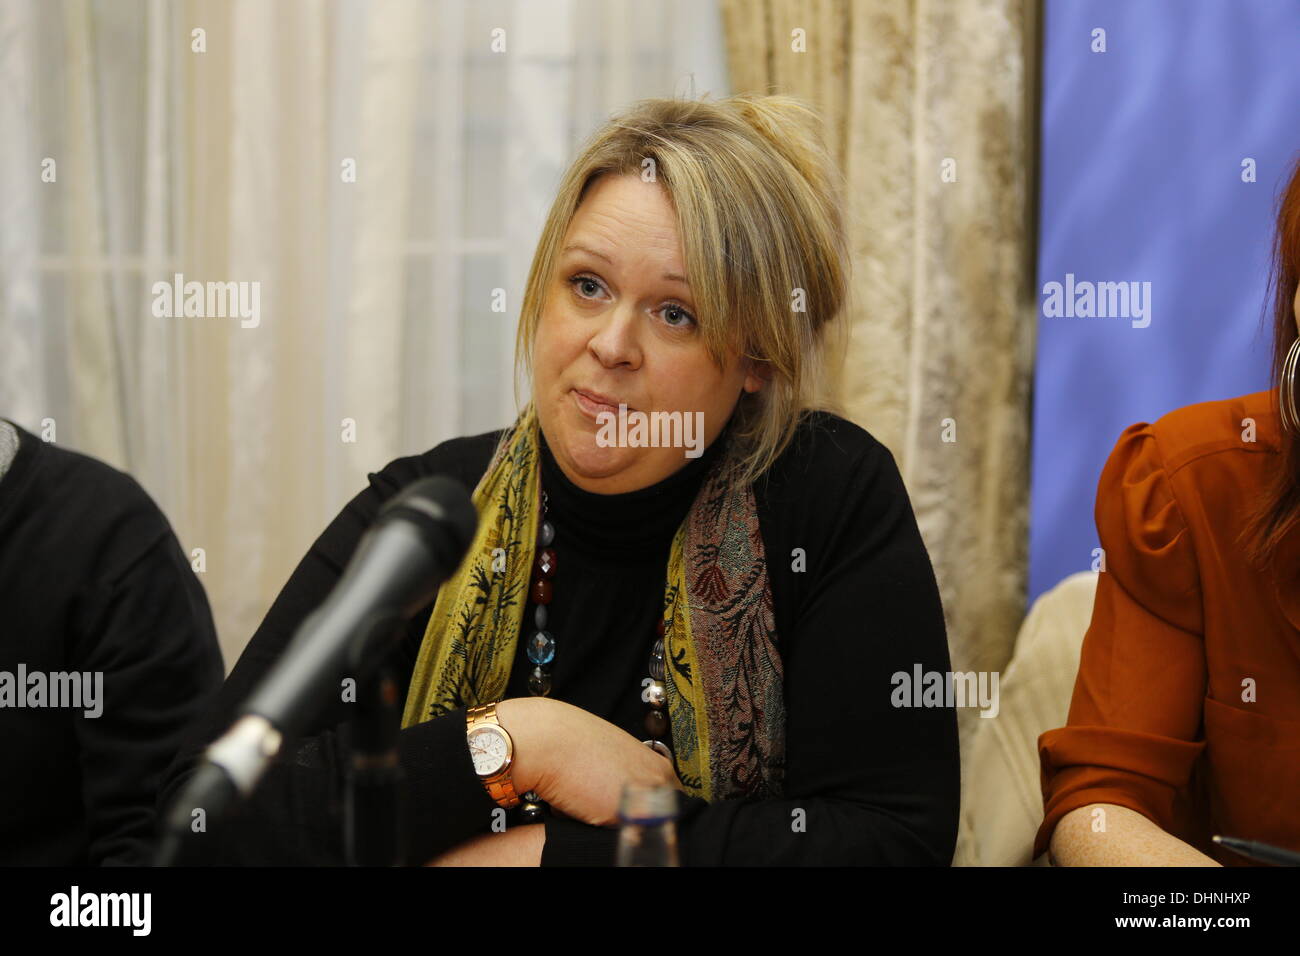 Dublin, Ireland. 13th November 2013. Ruth Bowie from the TFMR (Termination for Medical Reasons) campaign, who had an abortion due to a fatal fetal abnormality, is pictured at the press conference. The Center of Reproductive Rights brought a case against Ireland to the UN Human Rights Committee on behalf of Amanda Mellet. She had to travel to the UK for an abortion after she had been diagnosed with fatal fetal abnormality during her pregnancy. Abortions for fatal fetal abnormalities are illegal in Ireland. Credit:  Michael Debets/Alamy Live News Stock Photo